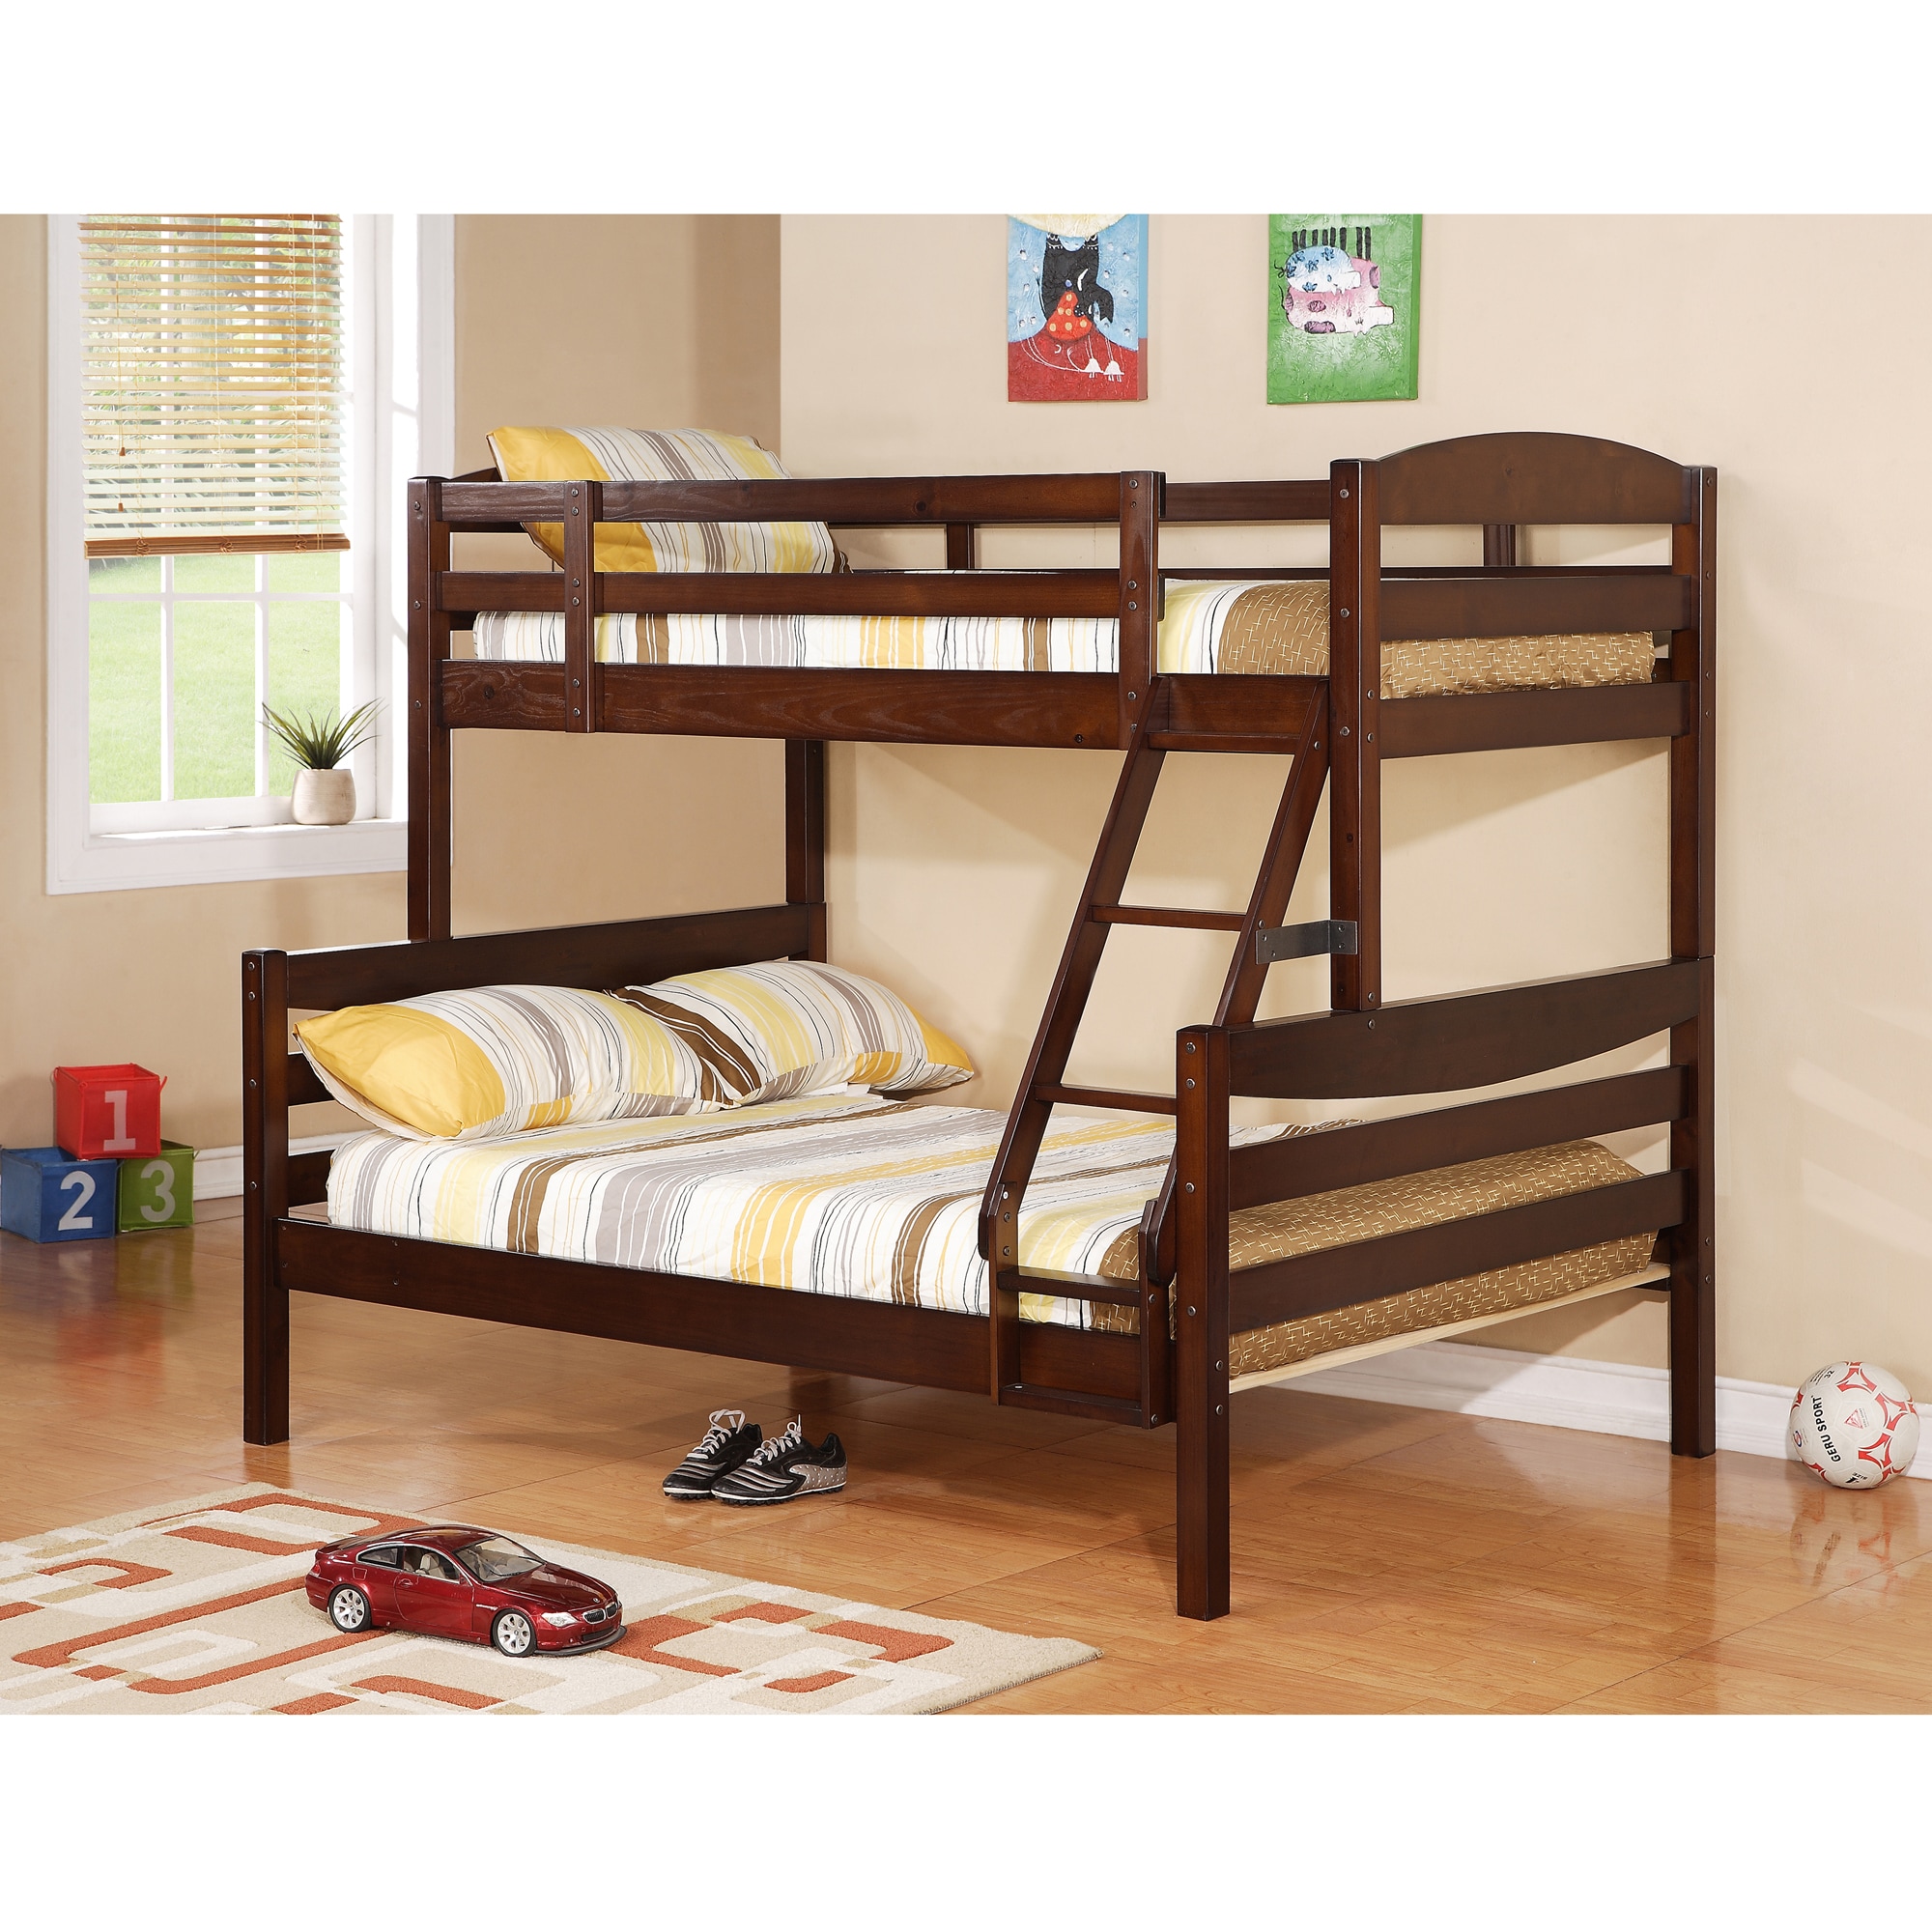 wooden double bunk bed